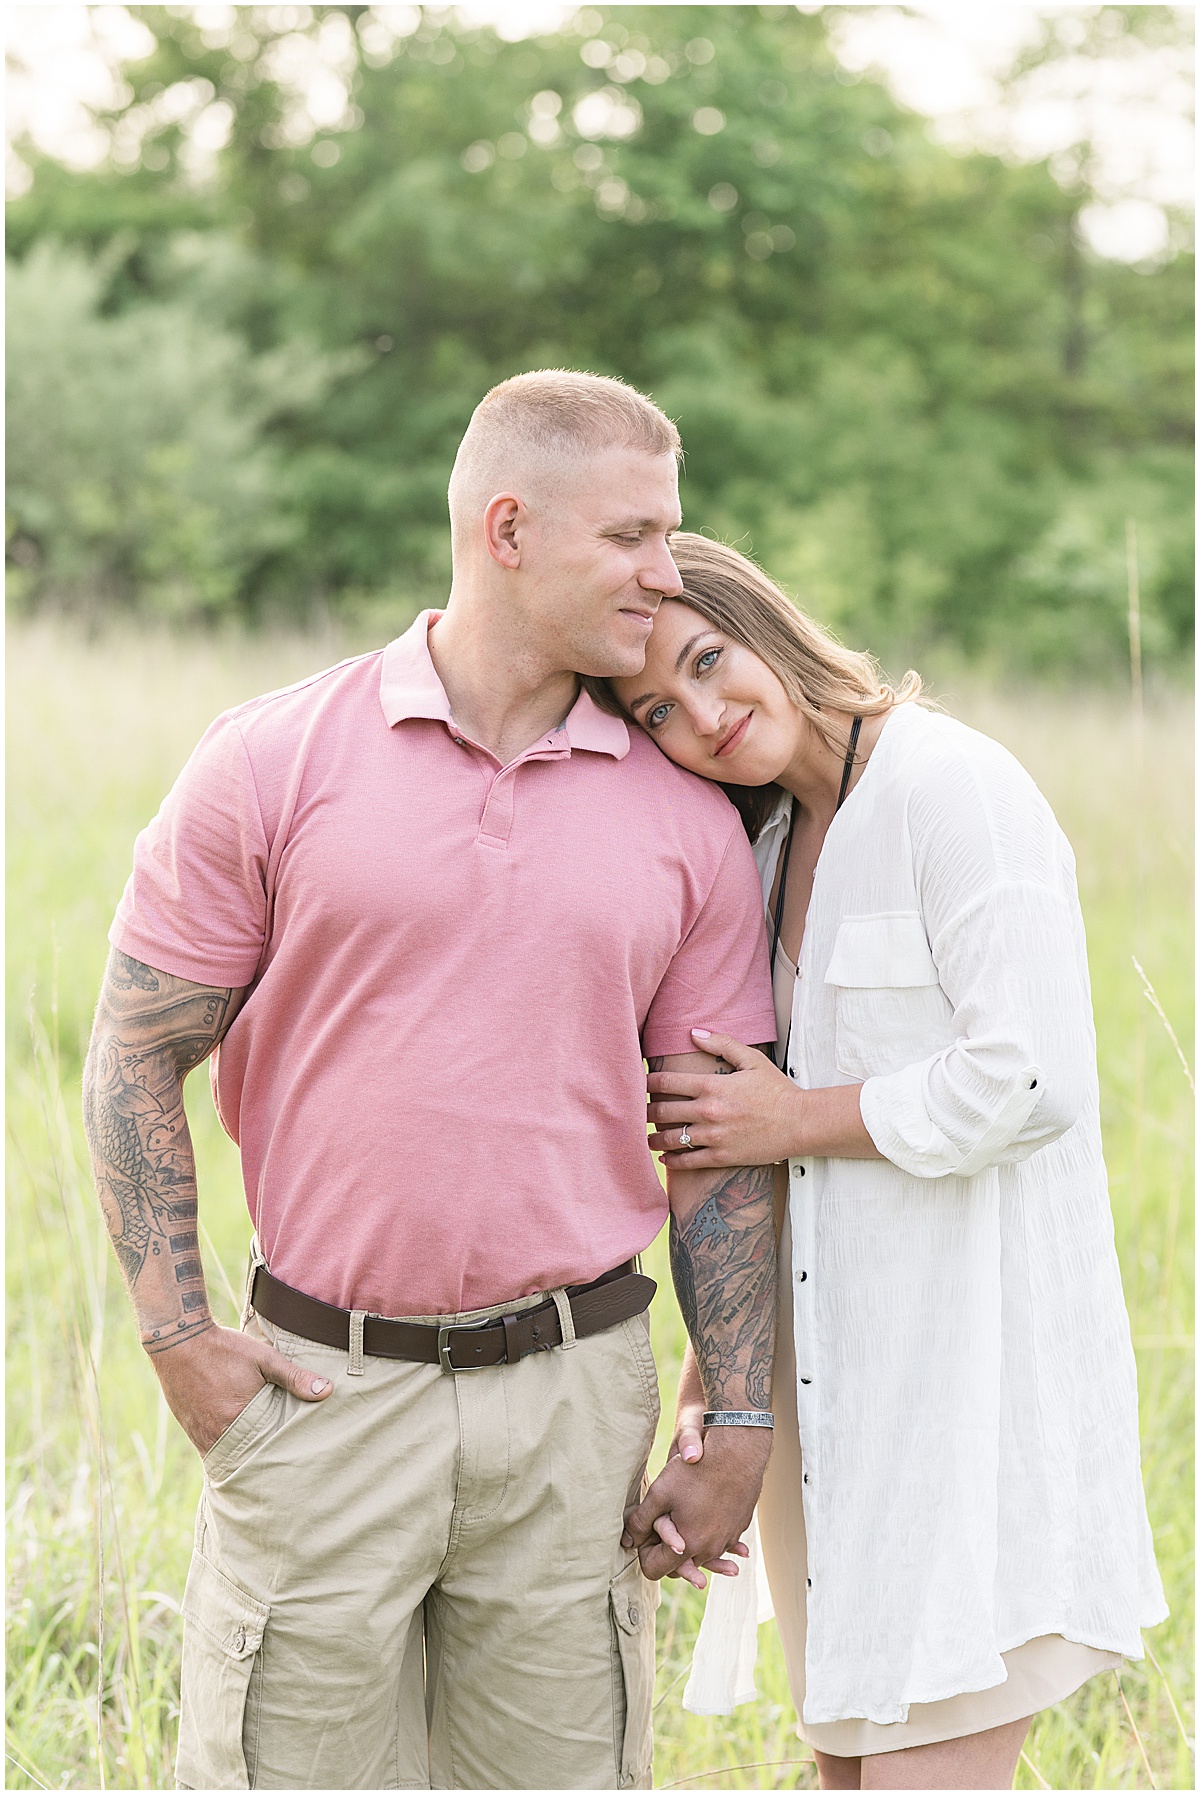 Summer sunrise engagement photos in Lafayette, Indiana at Fairfield Lakes Park